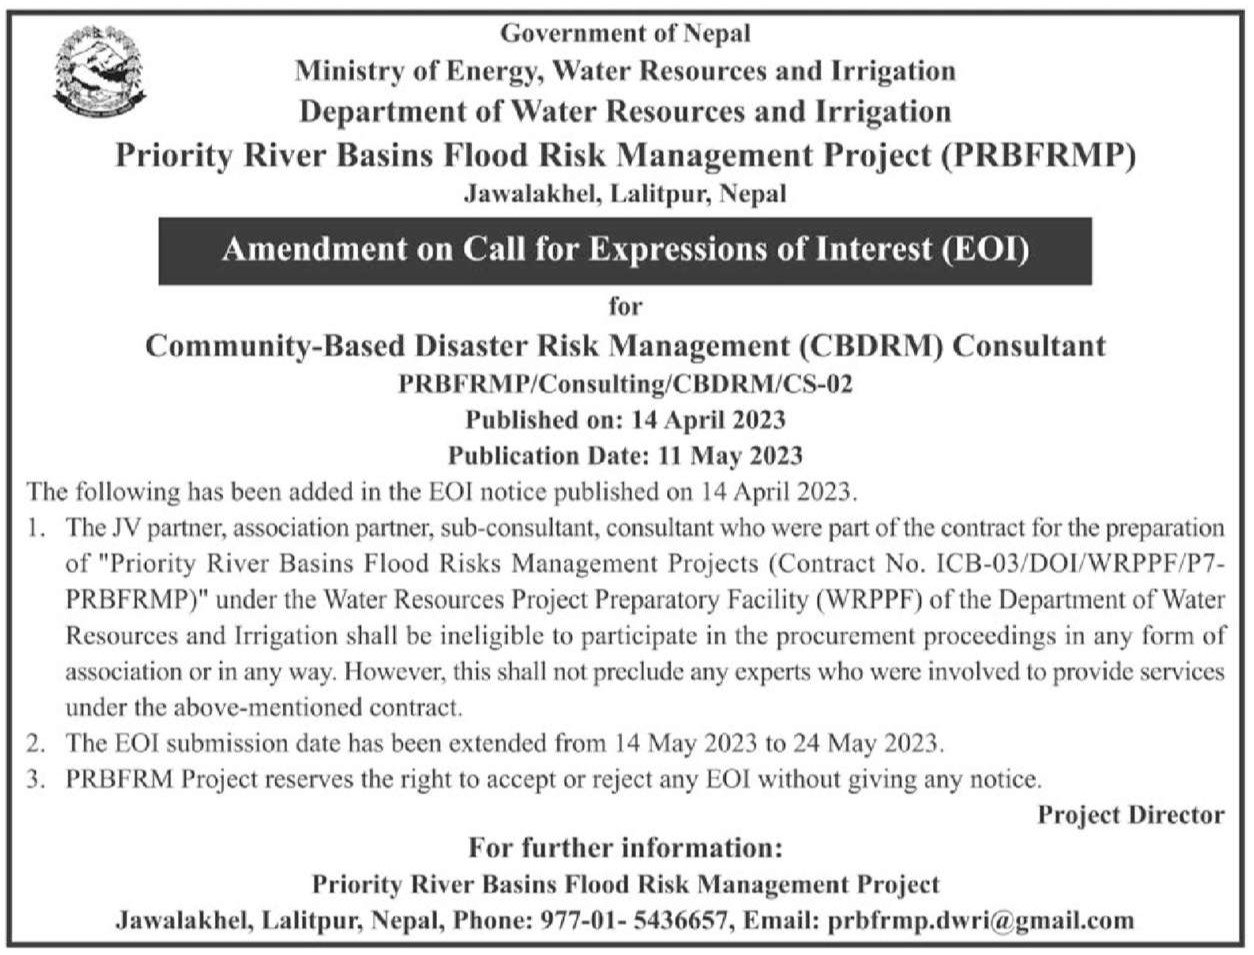 Amendment on Call for Expressions of Interest (EOI) for CBDRM Consultant